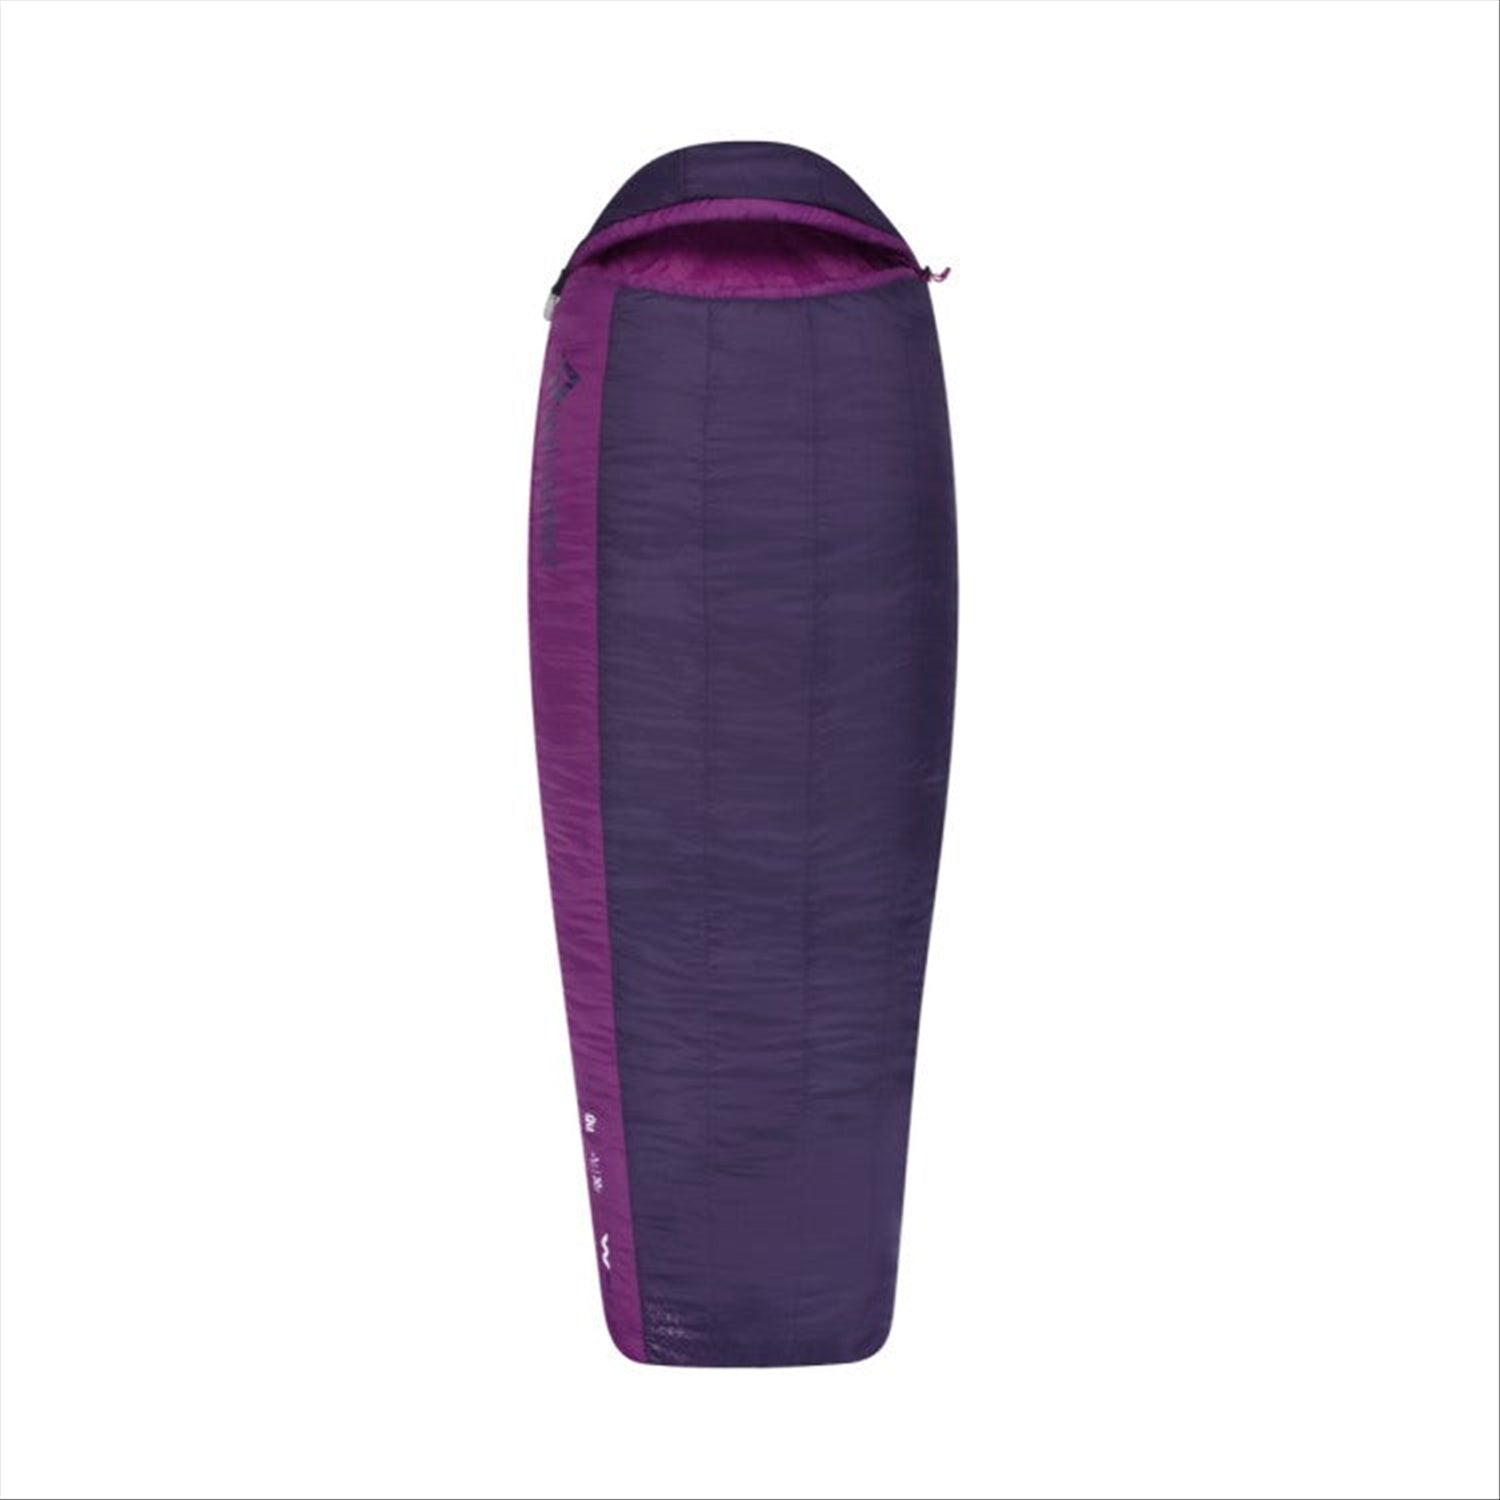 Sea to Summit Sea To Summit Women's Quest QUII Synthetic Sleeping Bag - Long